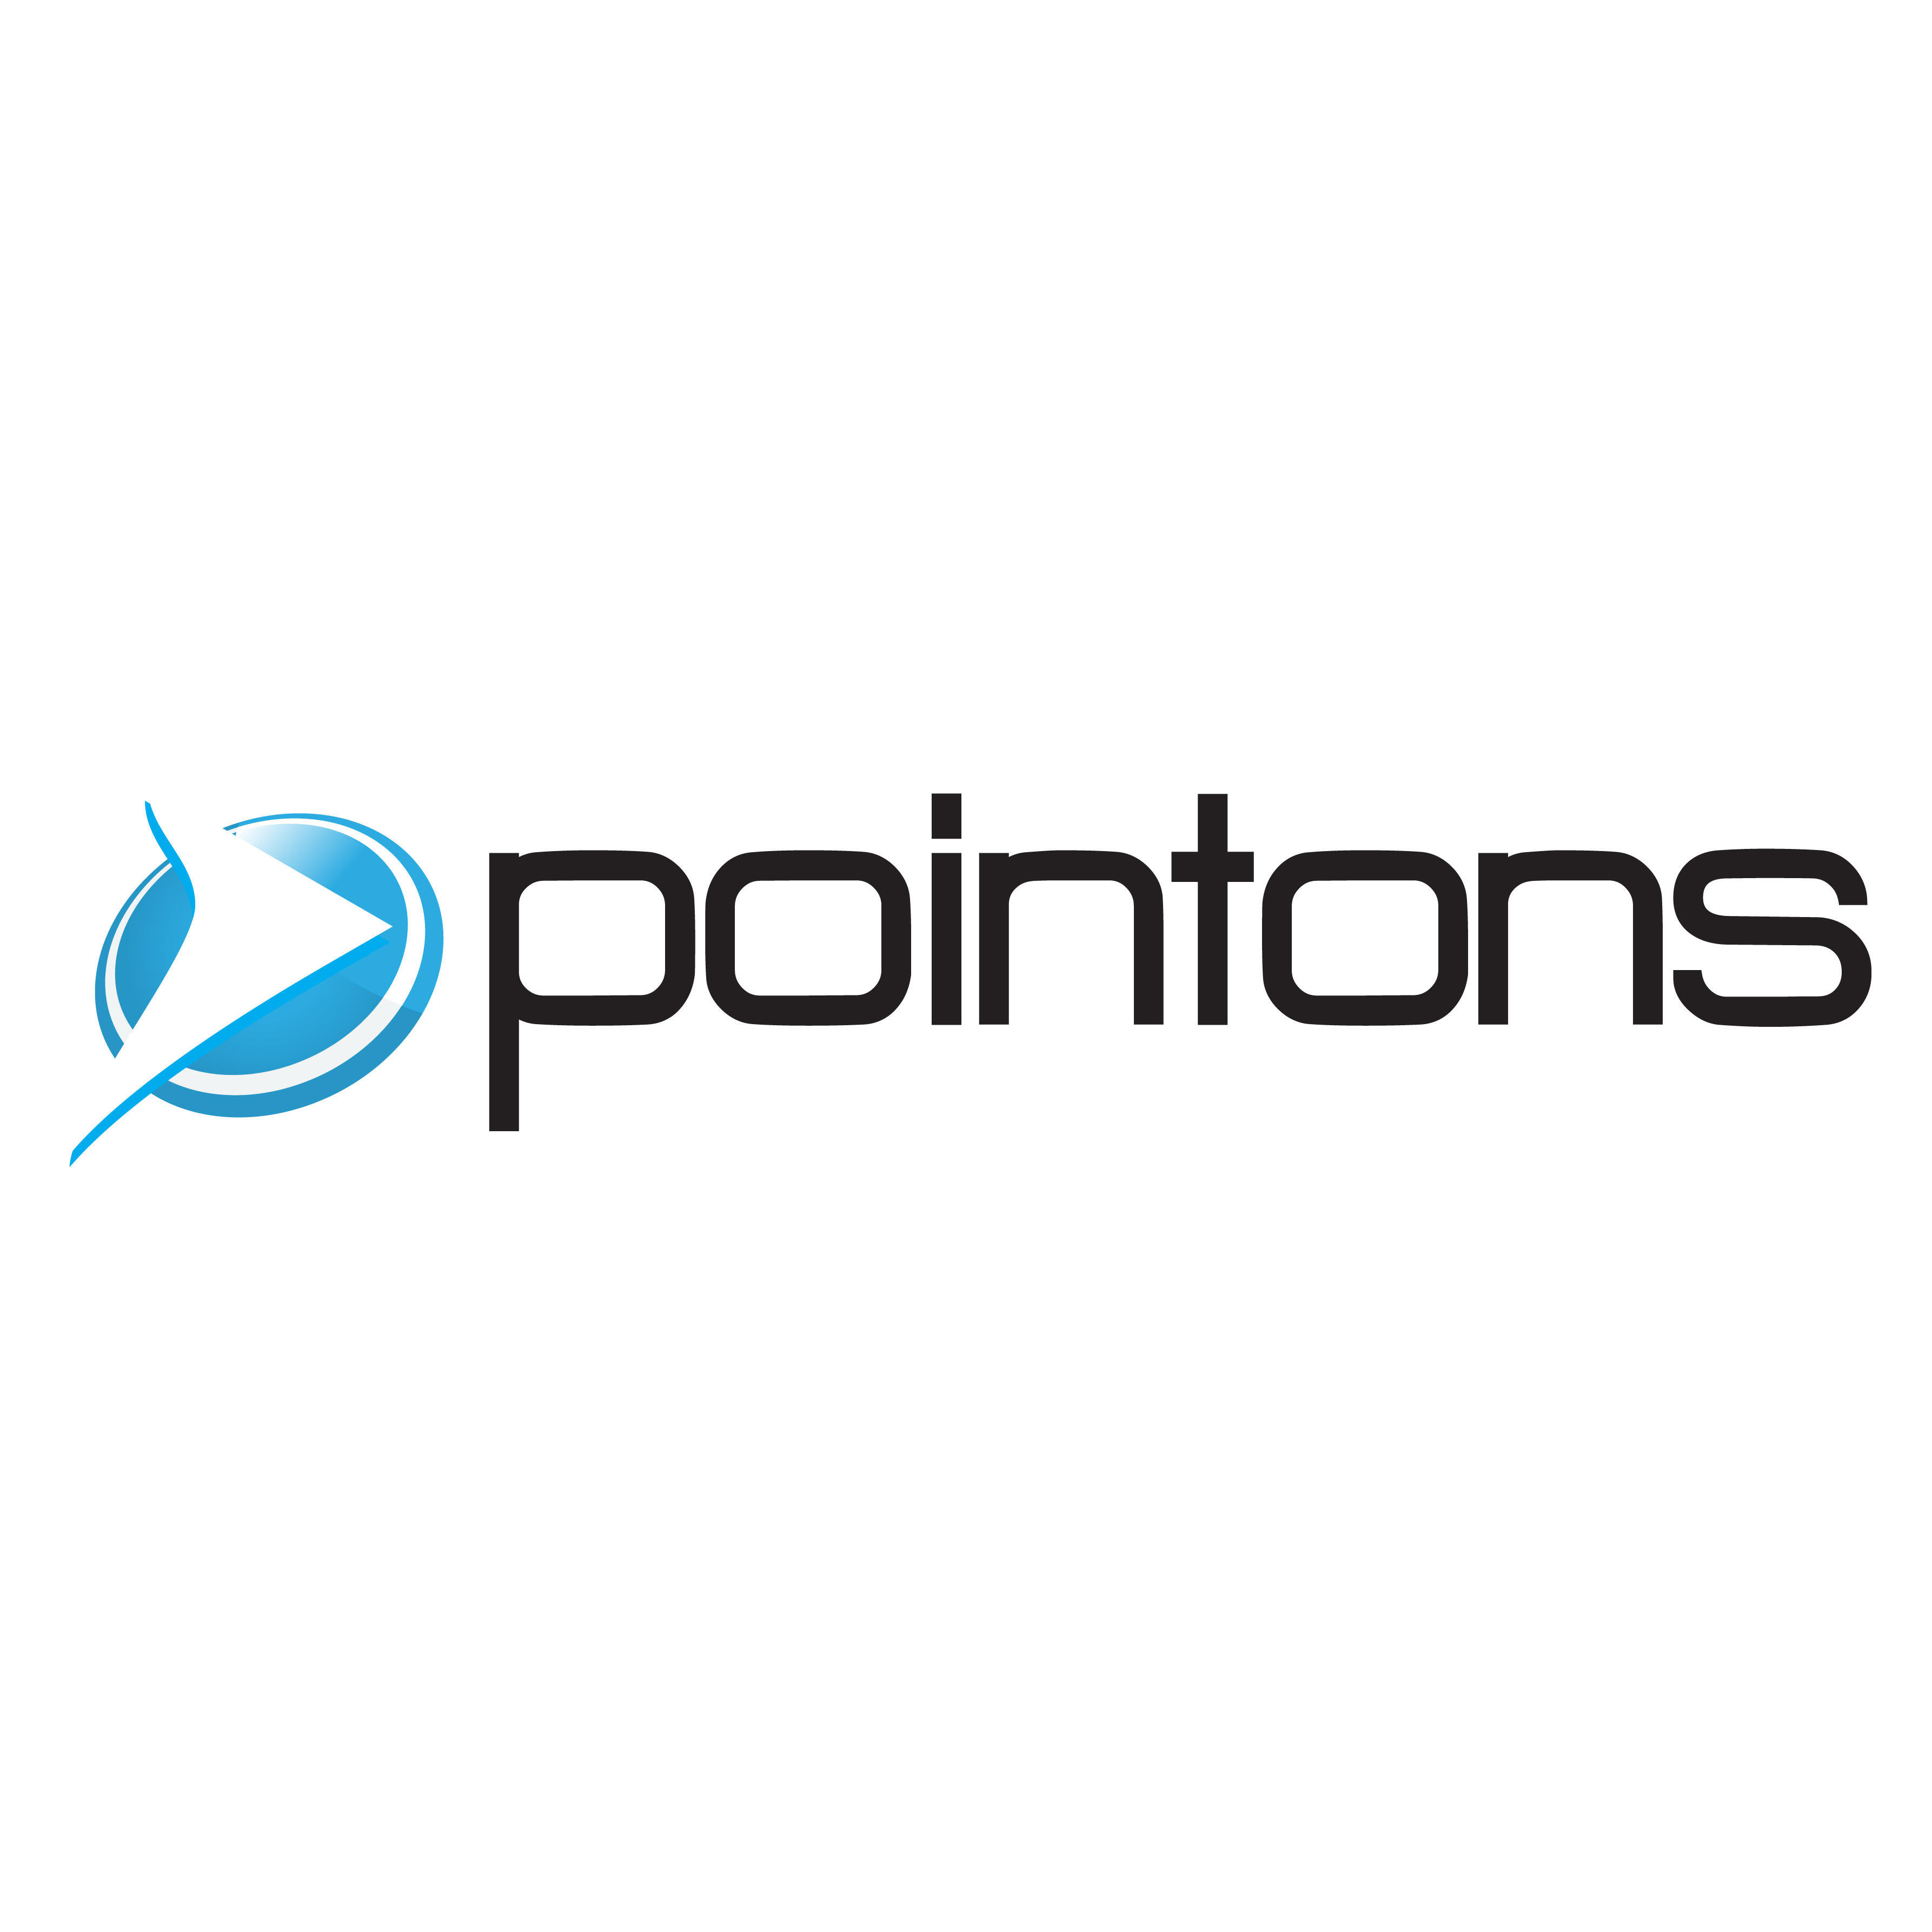 Pointons Pty Ltd Chartered Accountants and Financial Planners - Gawler, SA 5118 - (08) 8523 0133 | ShowMeLocal.com